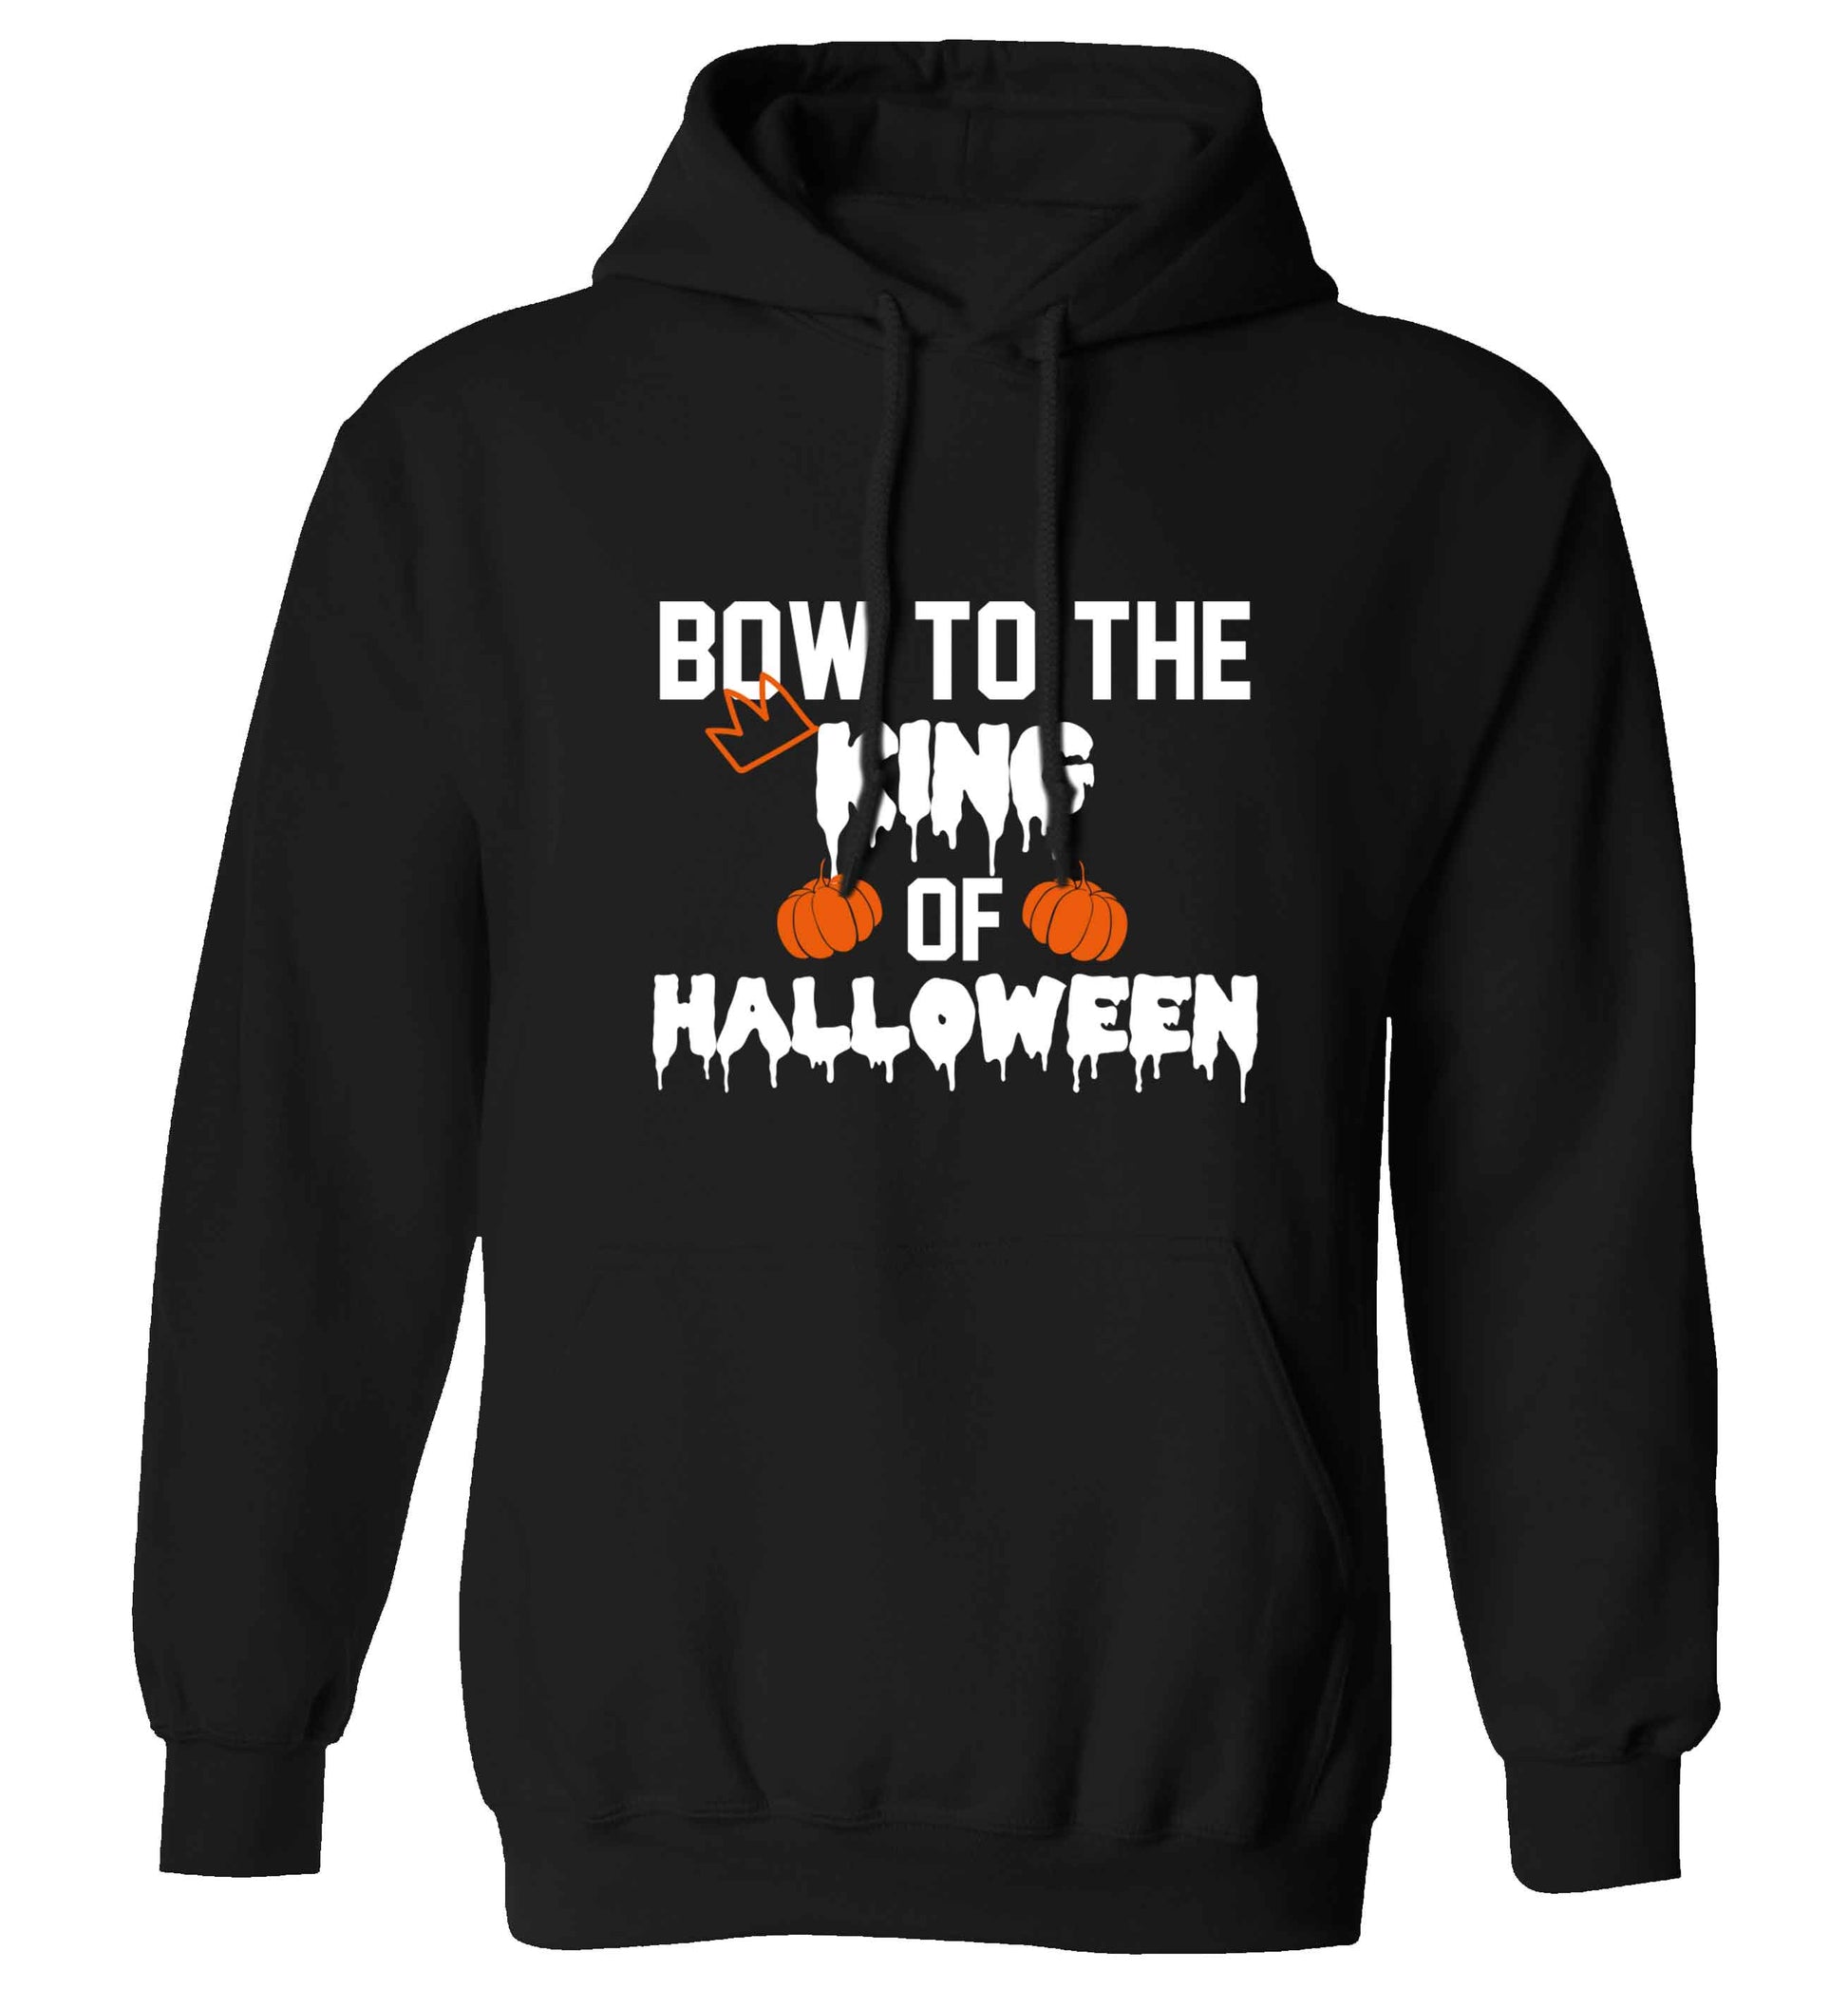 Bow to the King of halloween adults unisex black hoodie 2XL